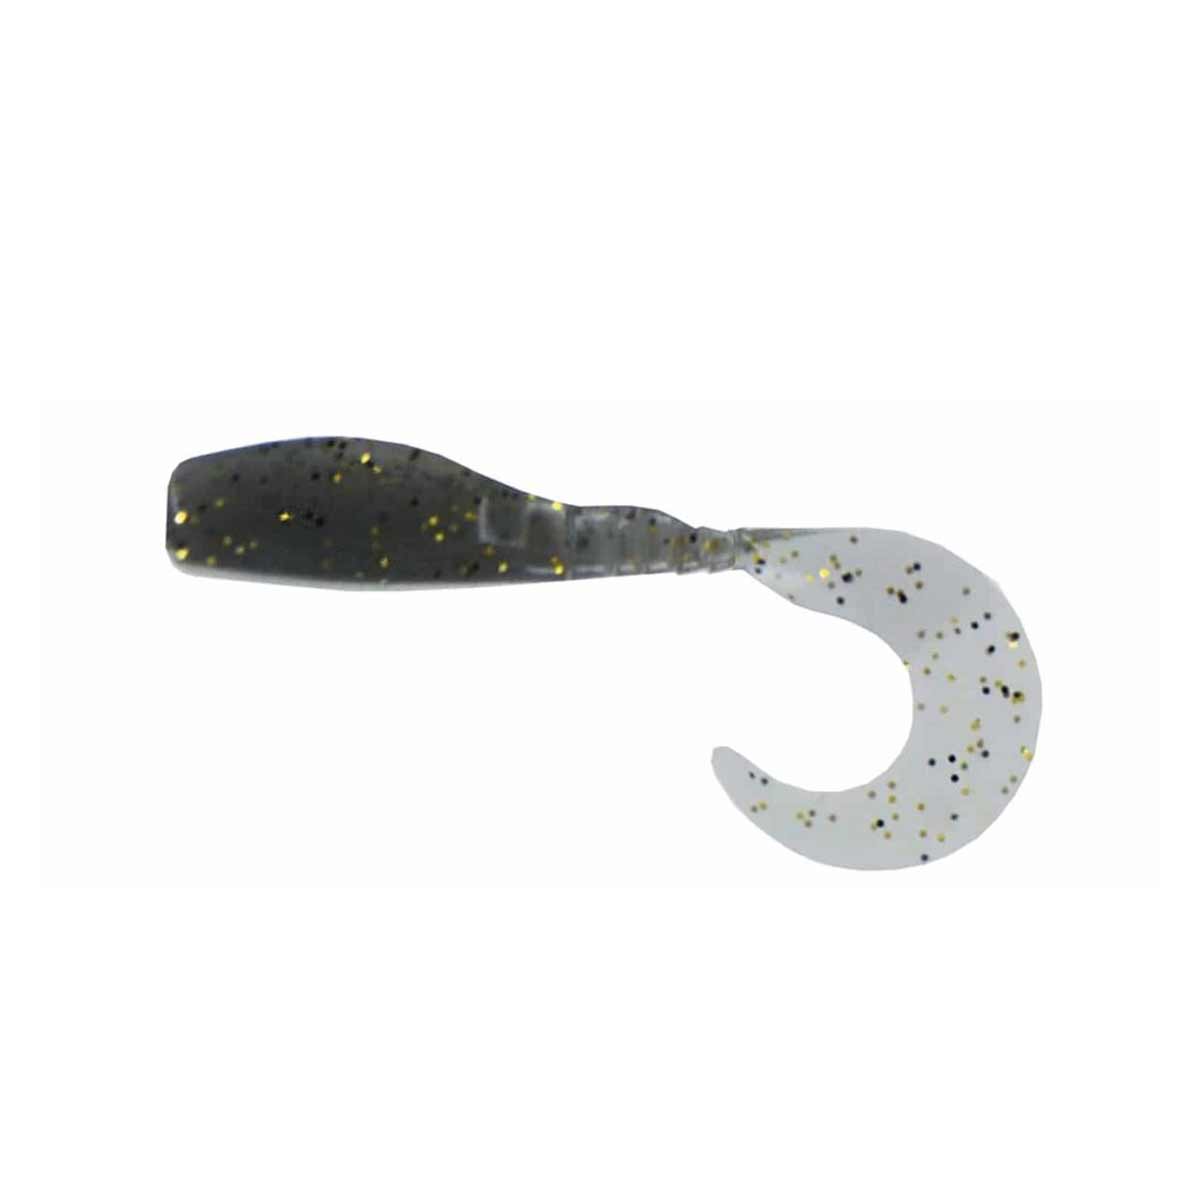 Curly Tail Crappie Minnow_Smoky Gold